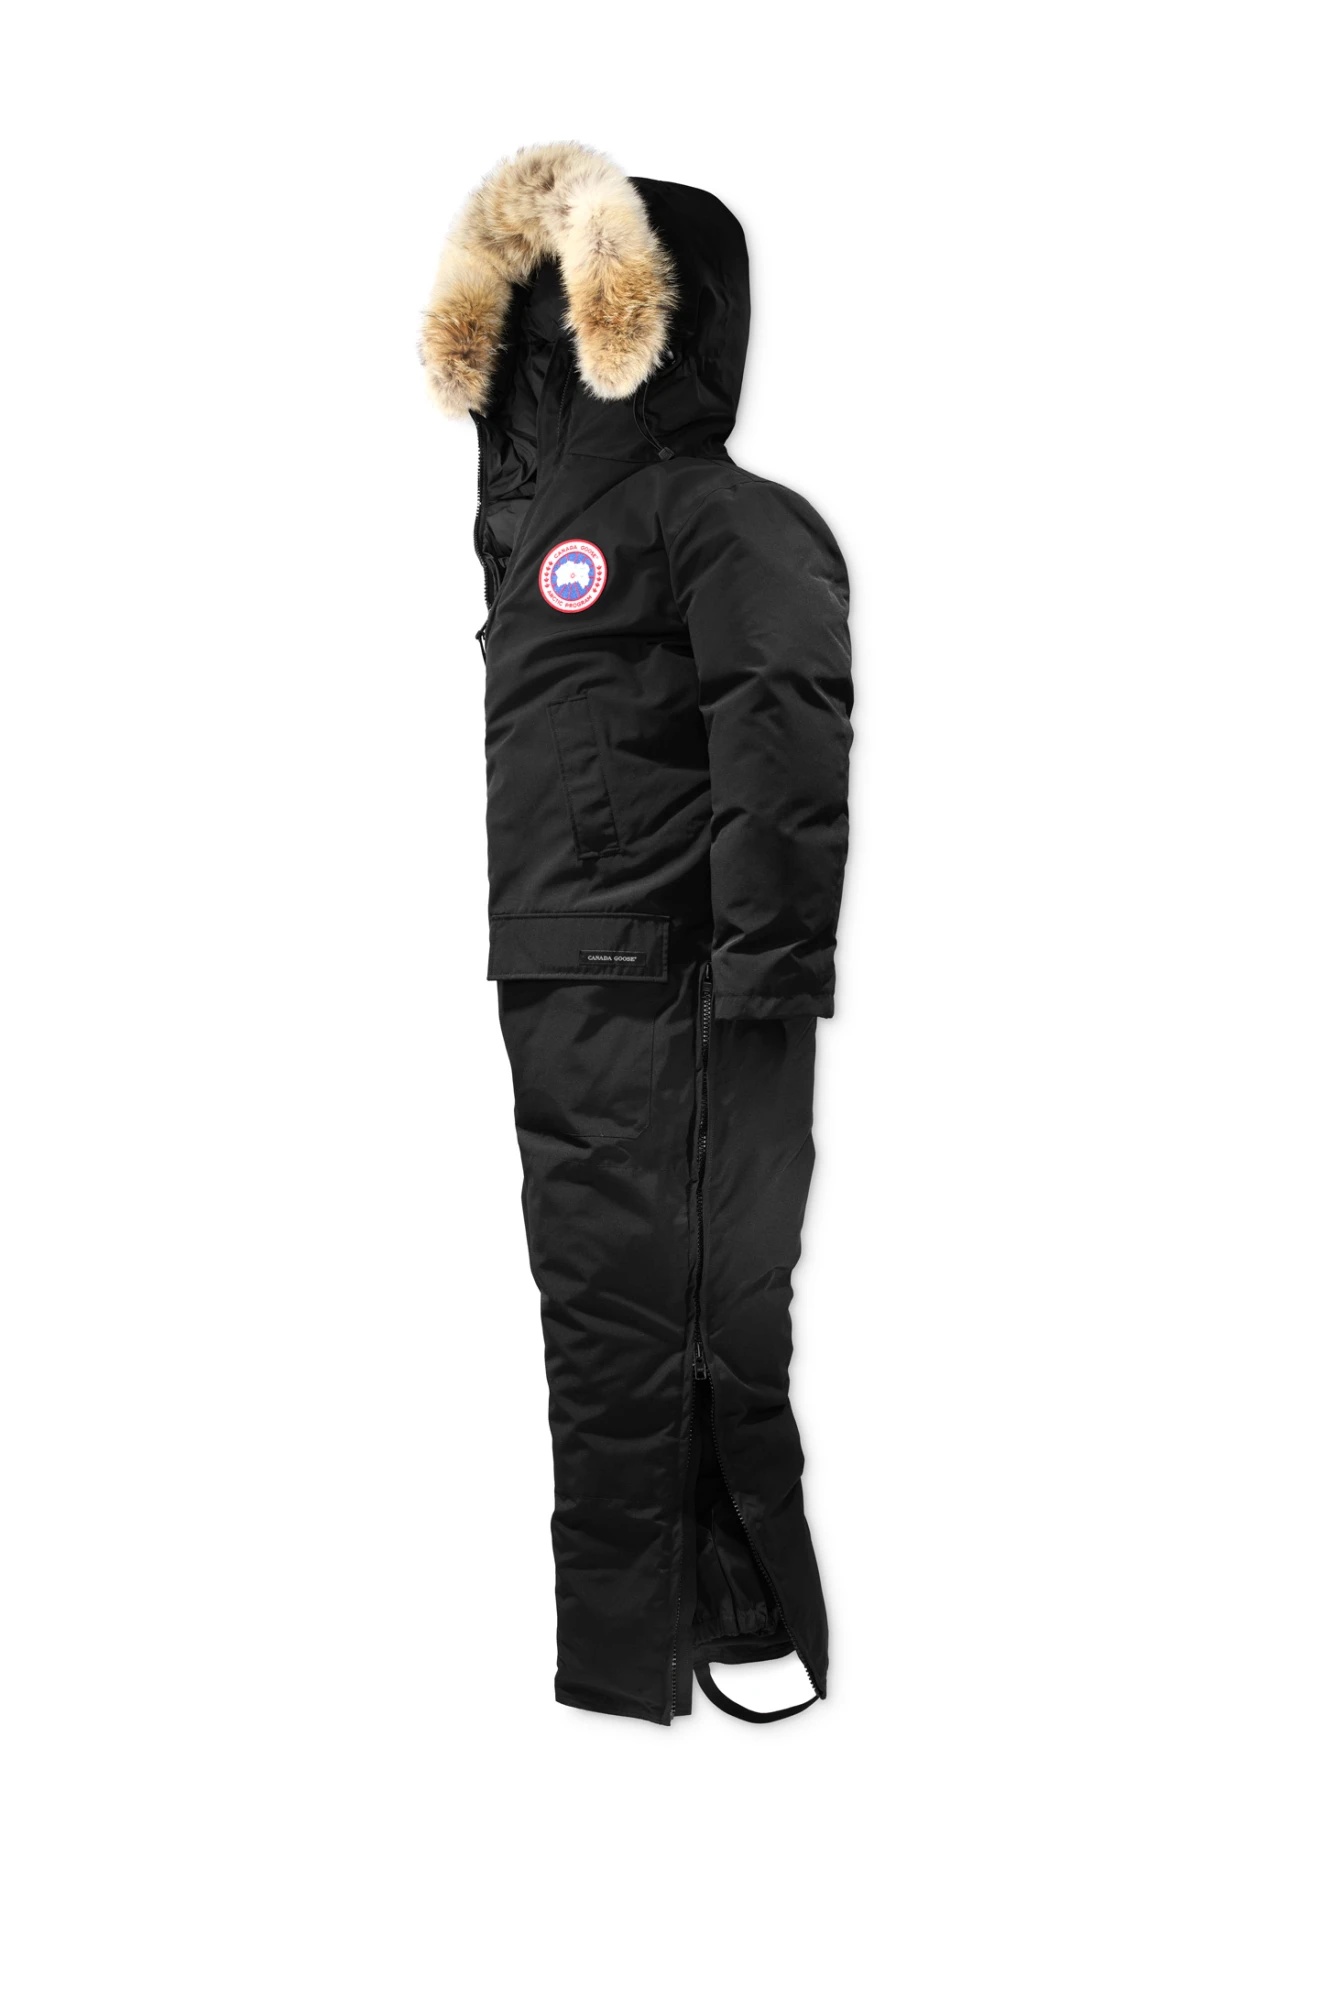 ARCTIC RIGGER COVERALL - 1